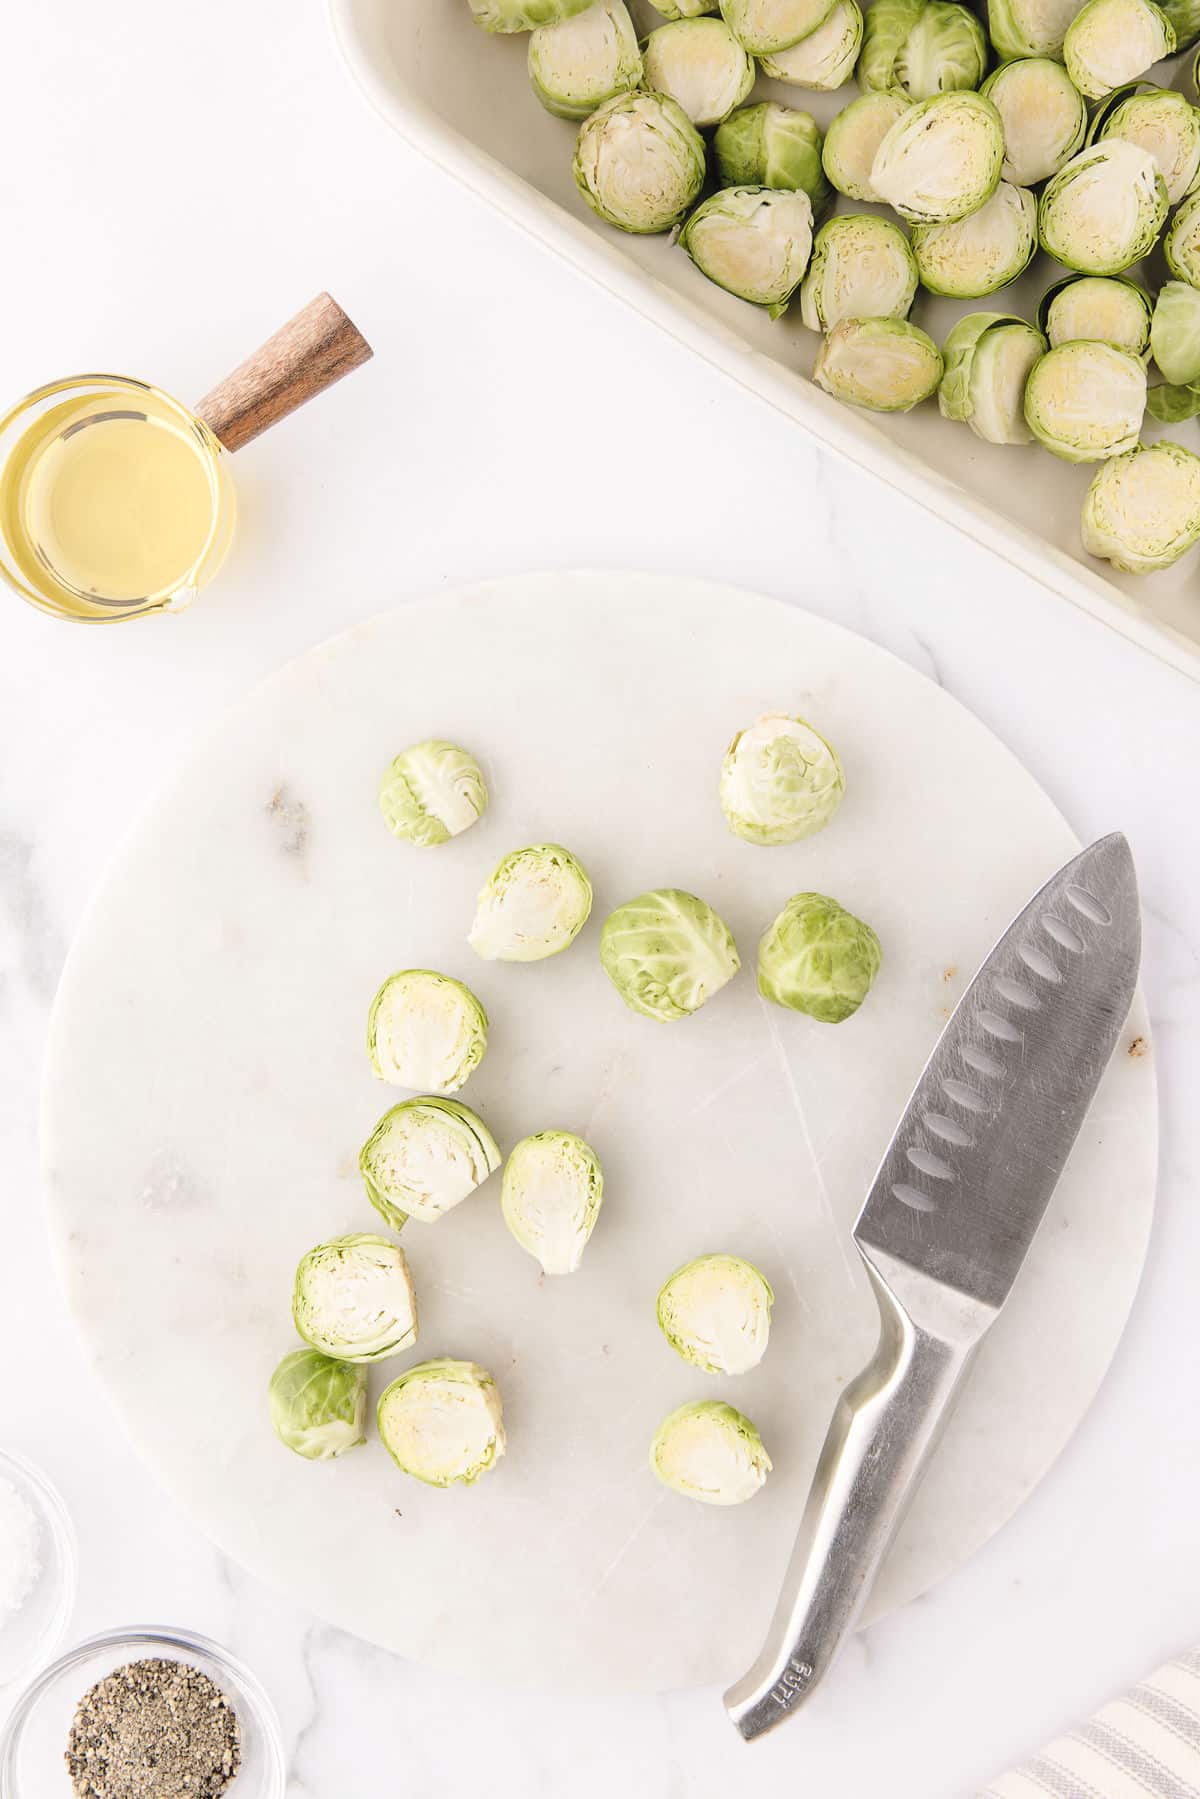 A knife and a few Brussels sprouts cut in half on a white cutting board. 